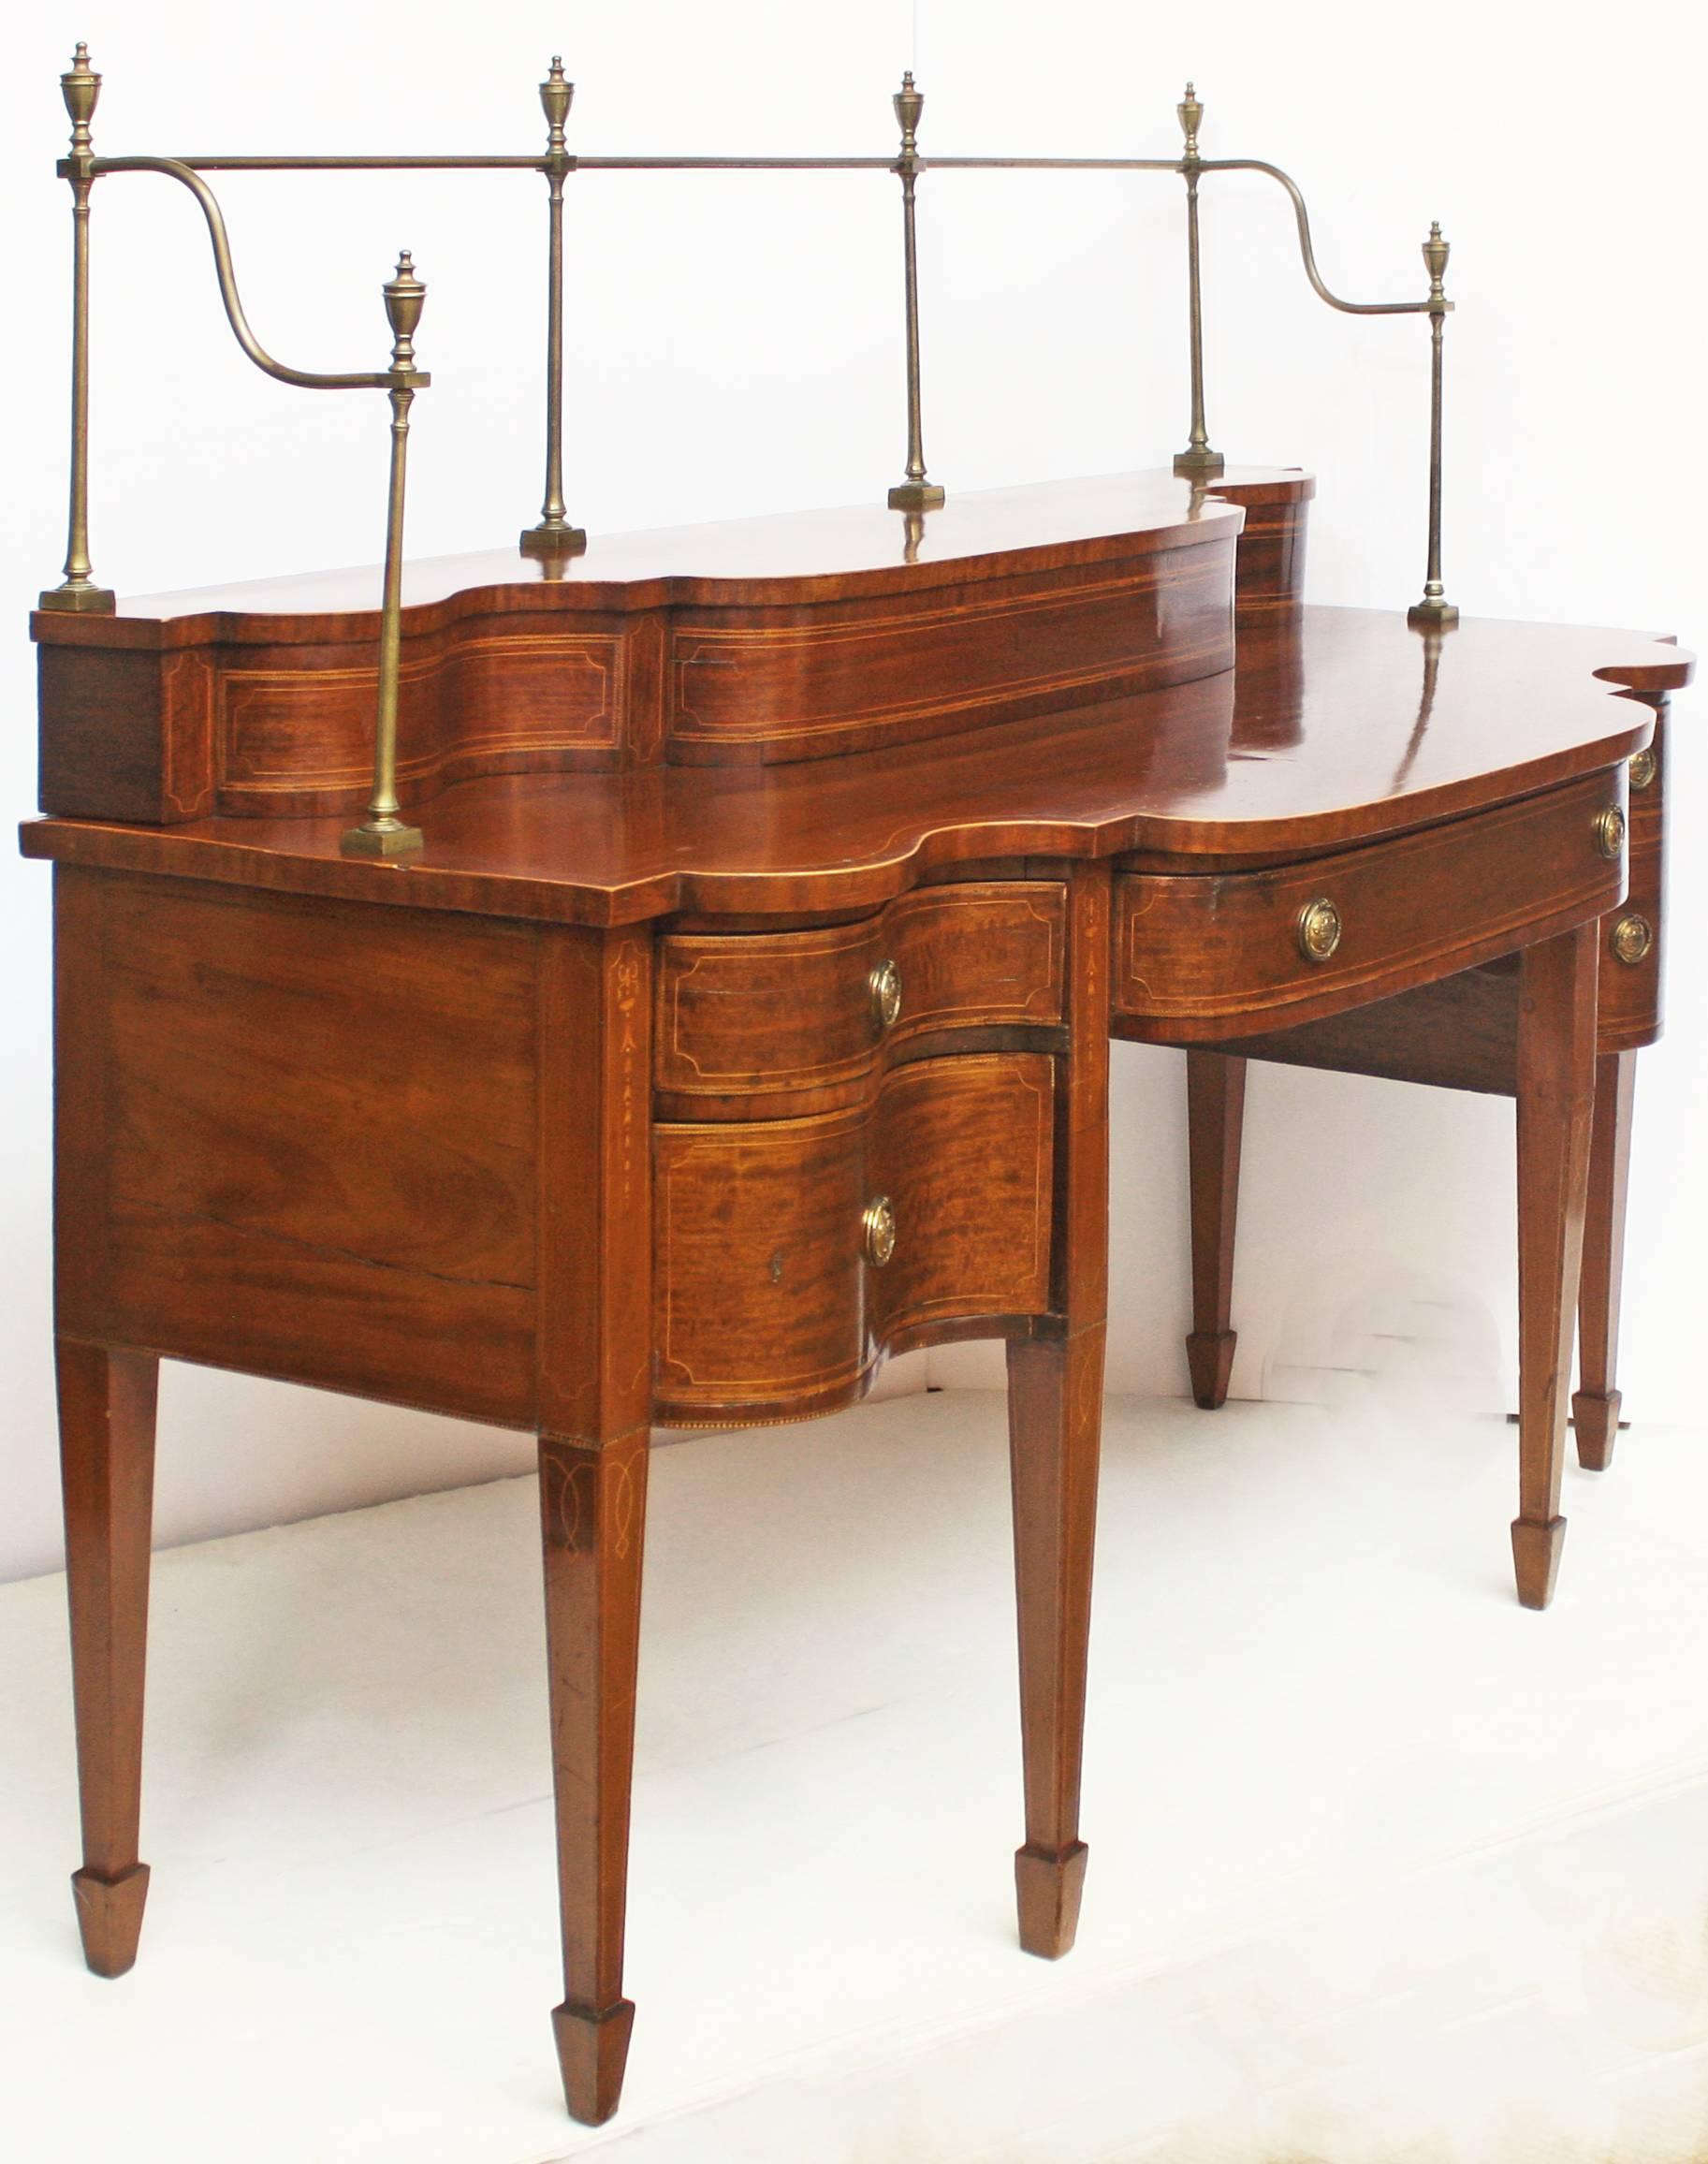 Georgian mahogany serpentine sideboard with bow and bell flower stringing on each leg. Square tapering legs terminating in spade feet. Long center drawer is flanked on left by two short drawers and on right by a cellarette that mimics two short